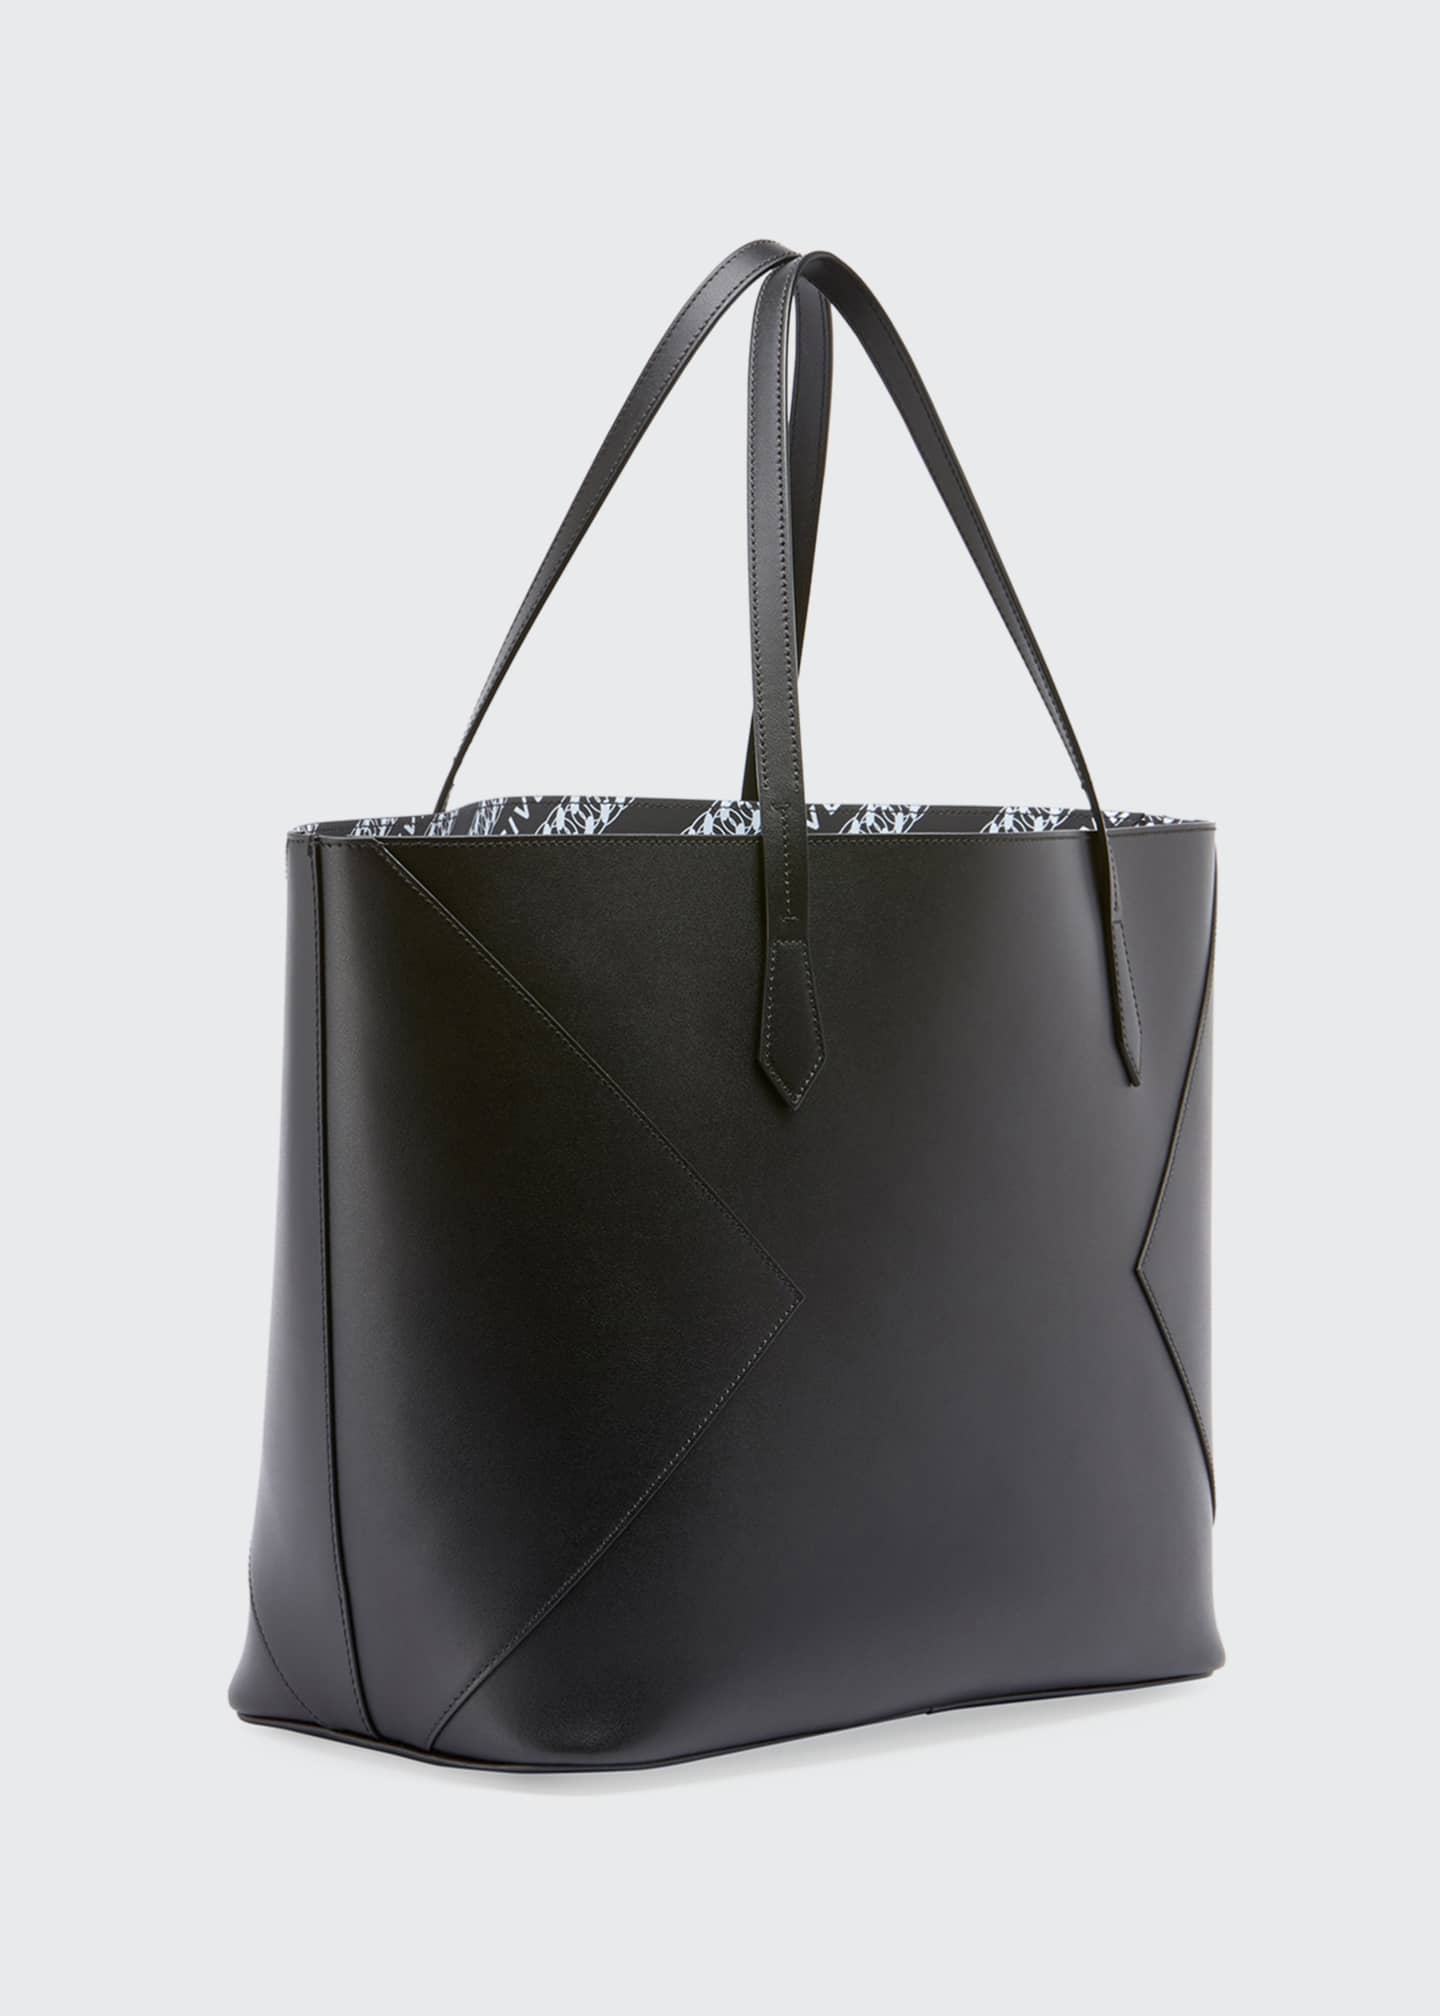 Givenchy Wing Smooth Leather Shopping Tote Bag - Bergdorf Goodman